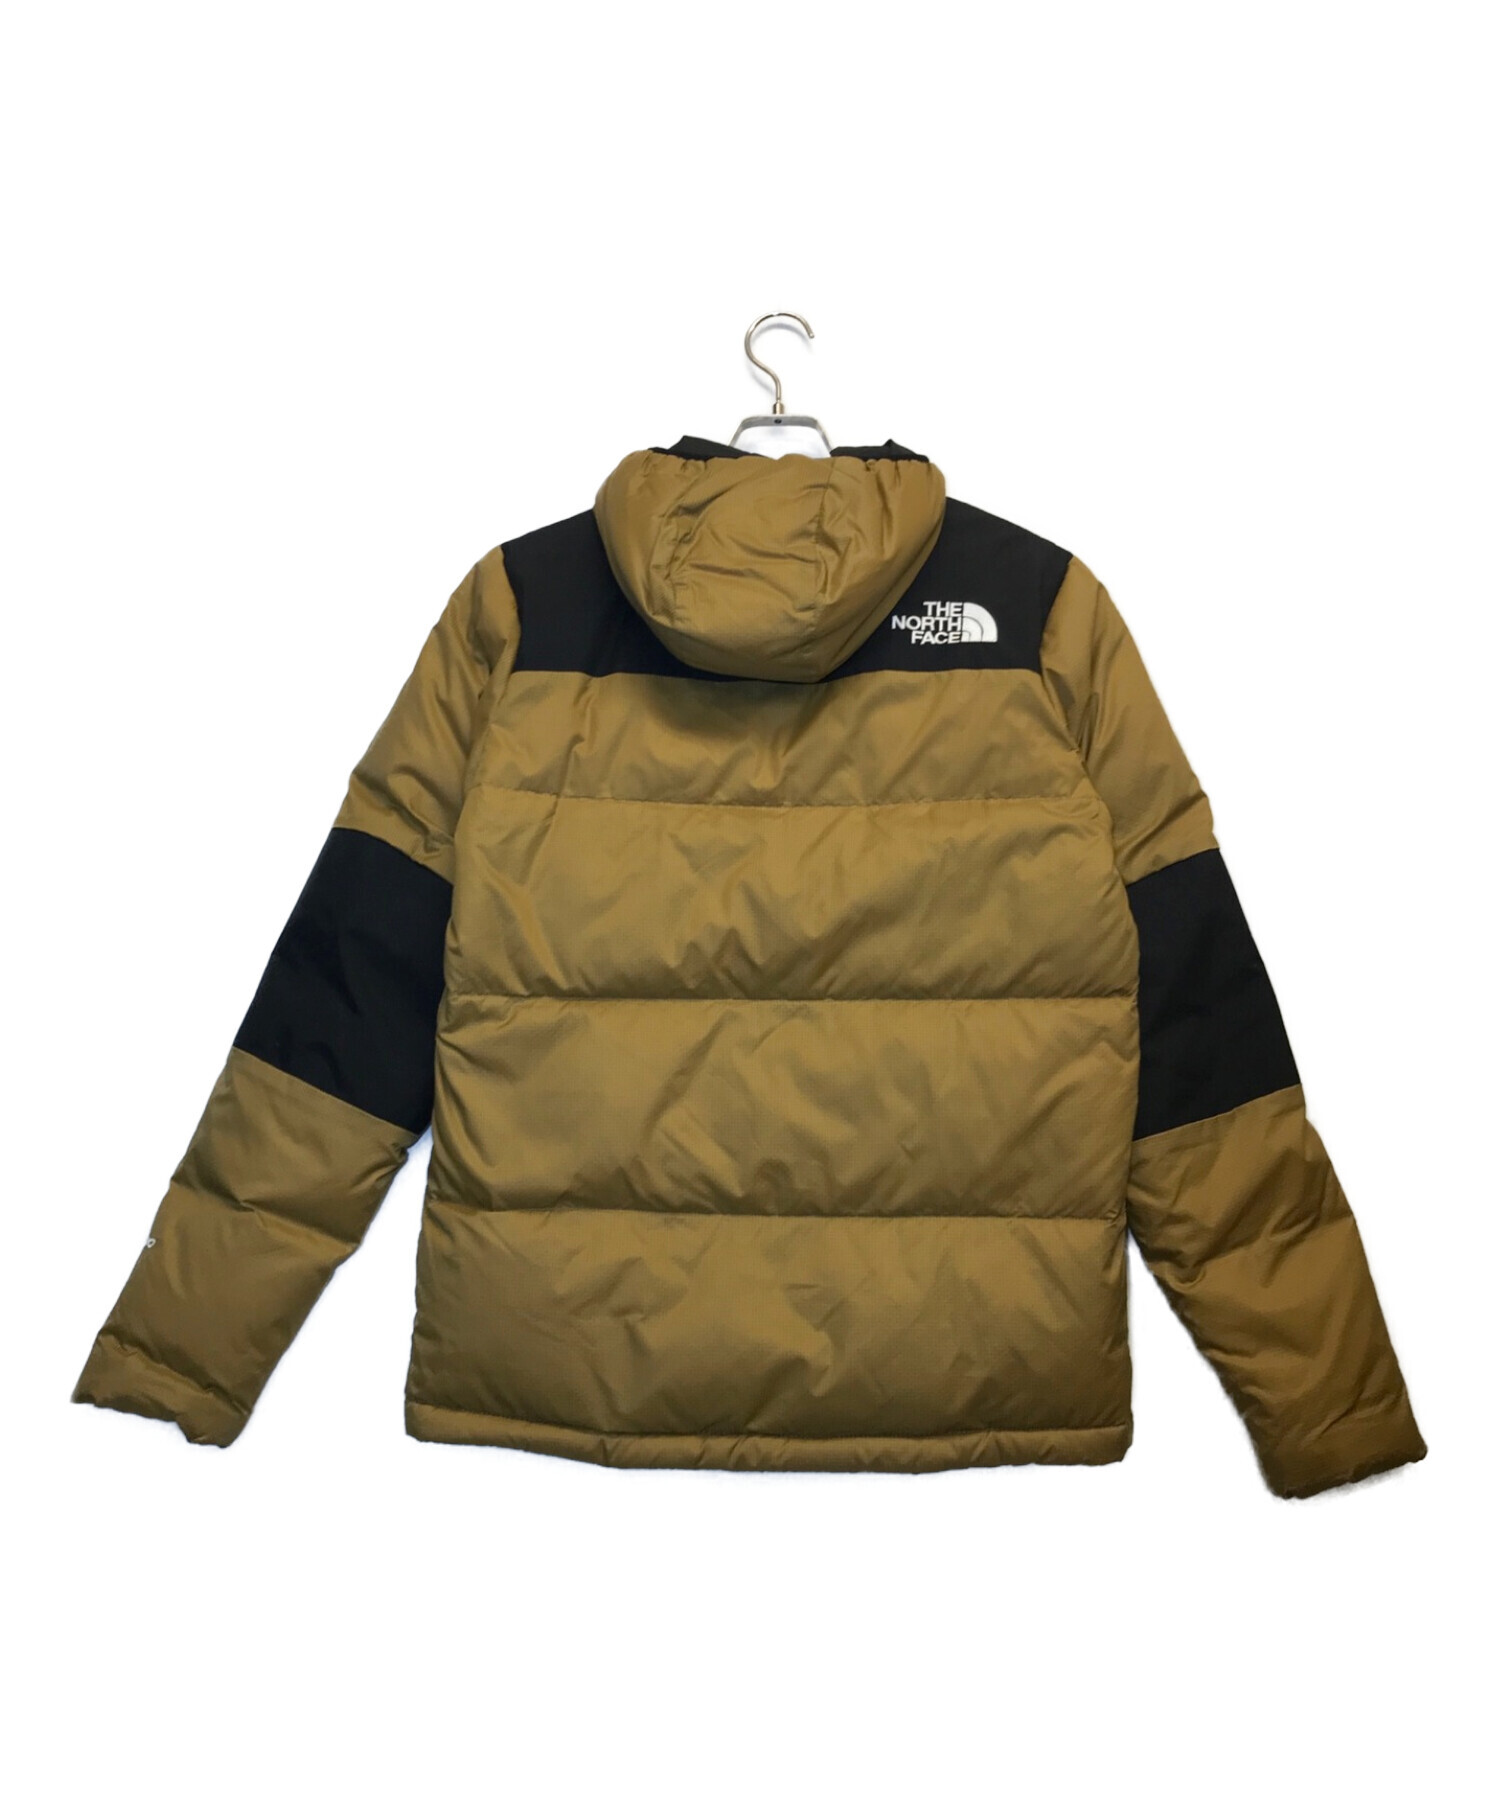 S the north face himalayan hoody カーキ